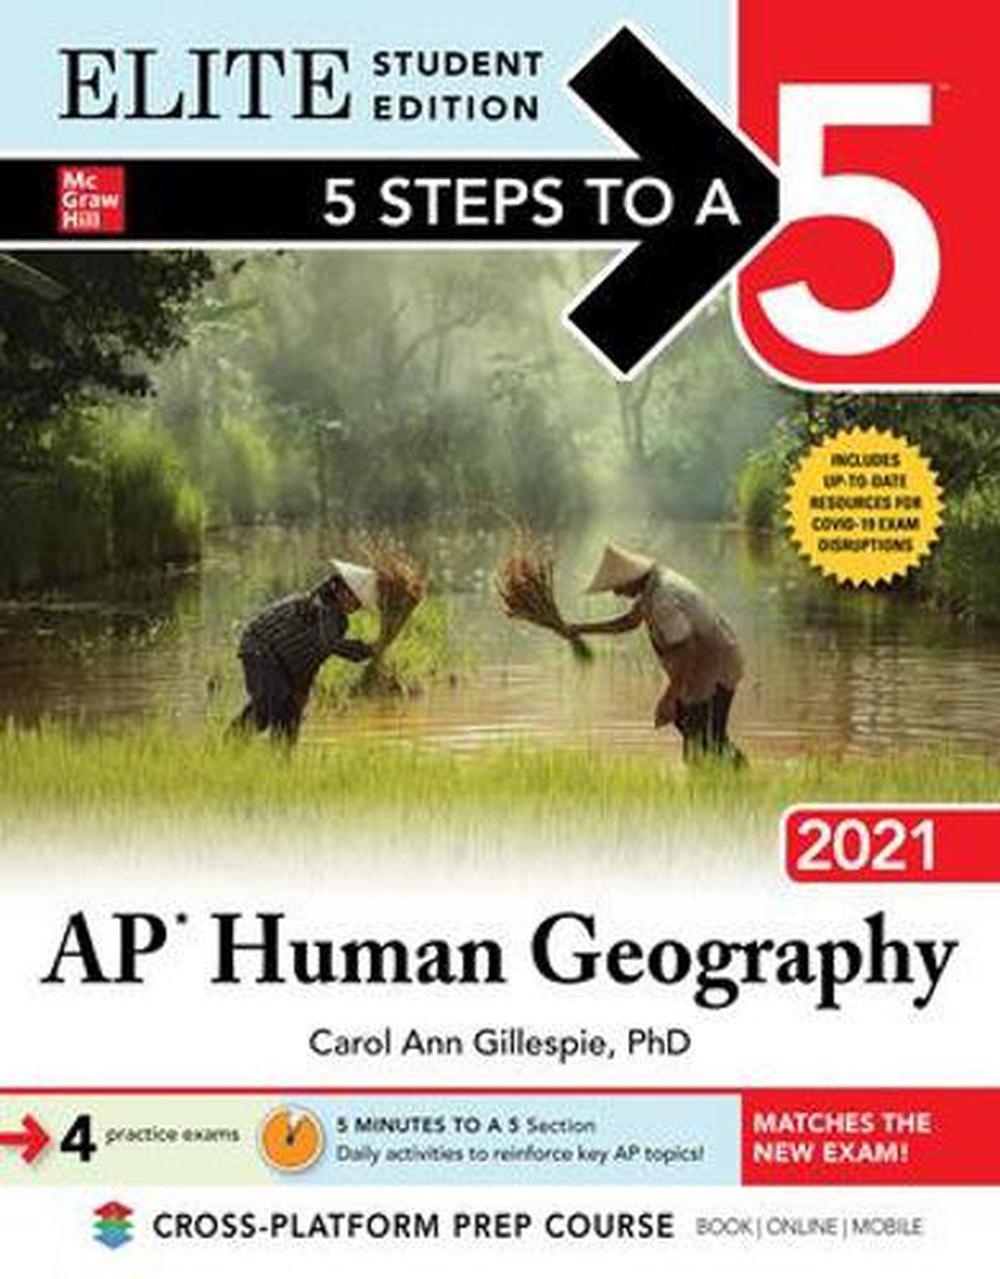 ap human geography research topics